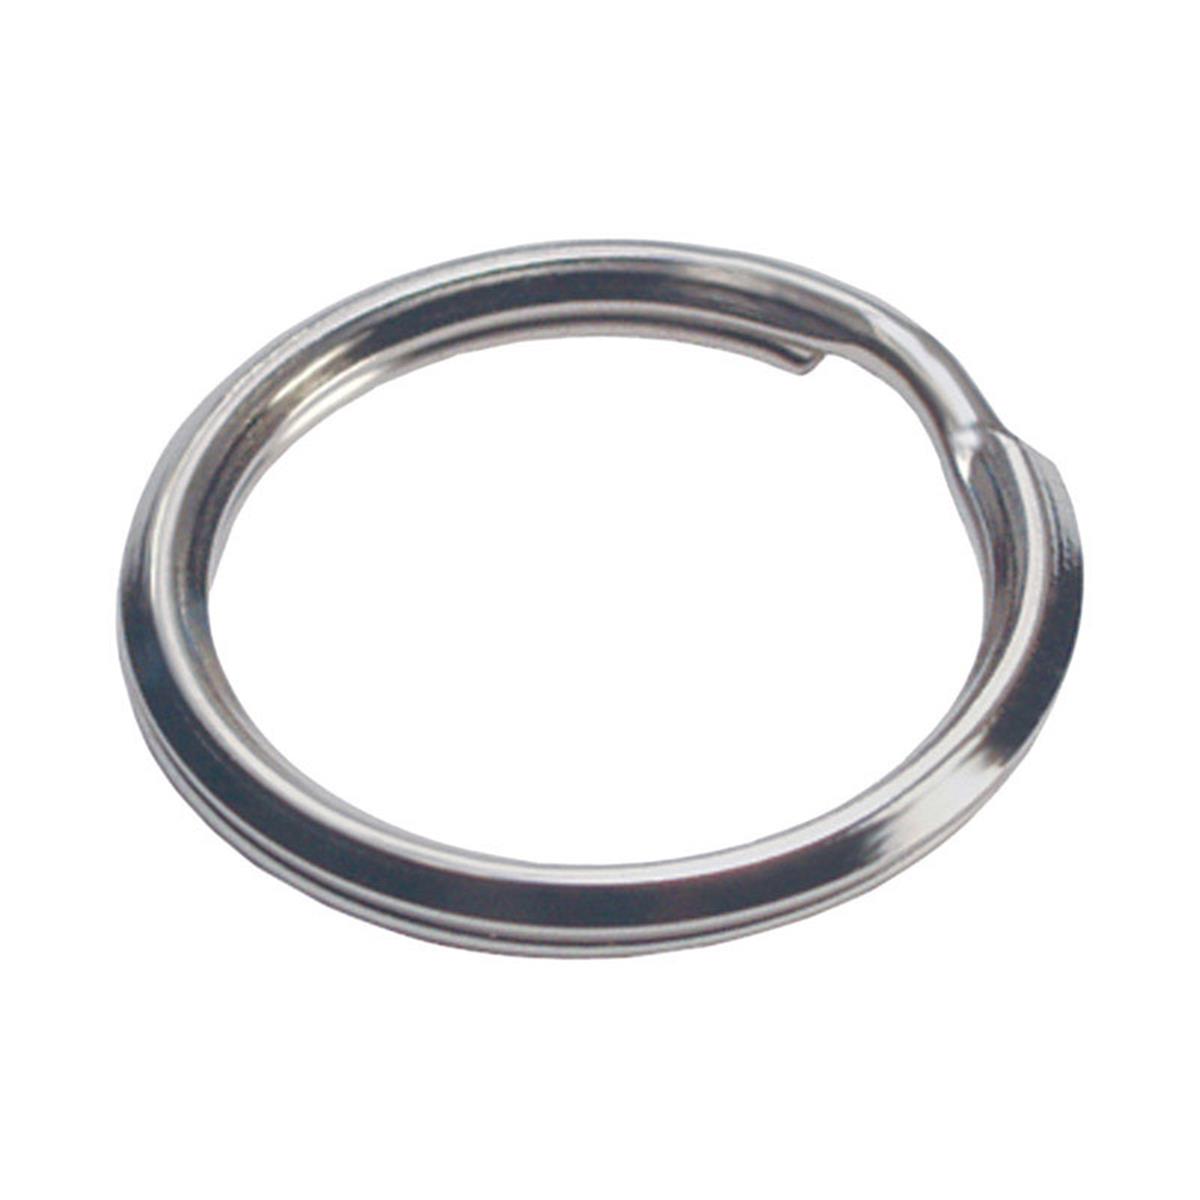 Picture of Hillman 5936620 Tempered Steel Split Cable Rings Key, Silver - Pack of 50